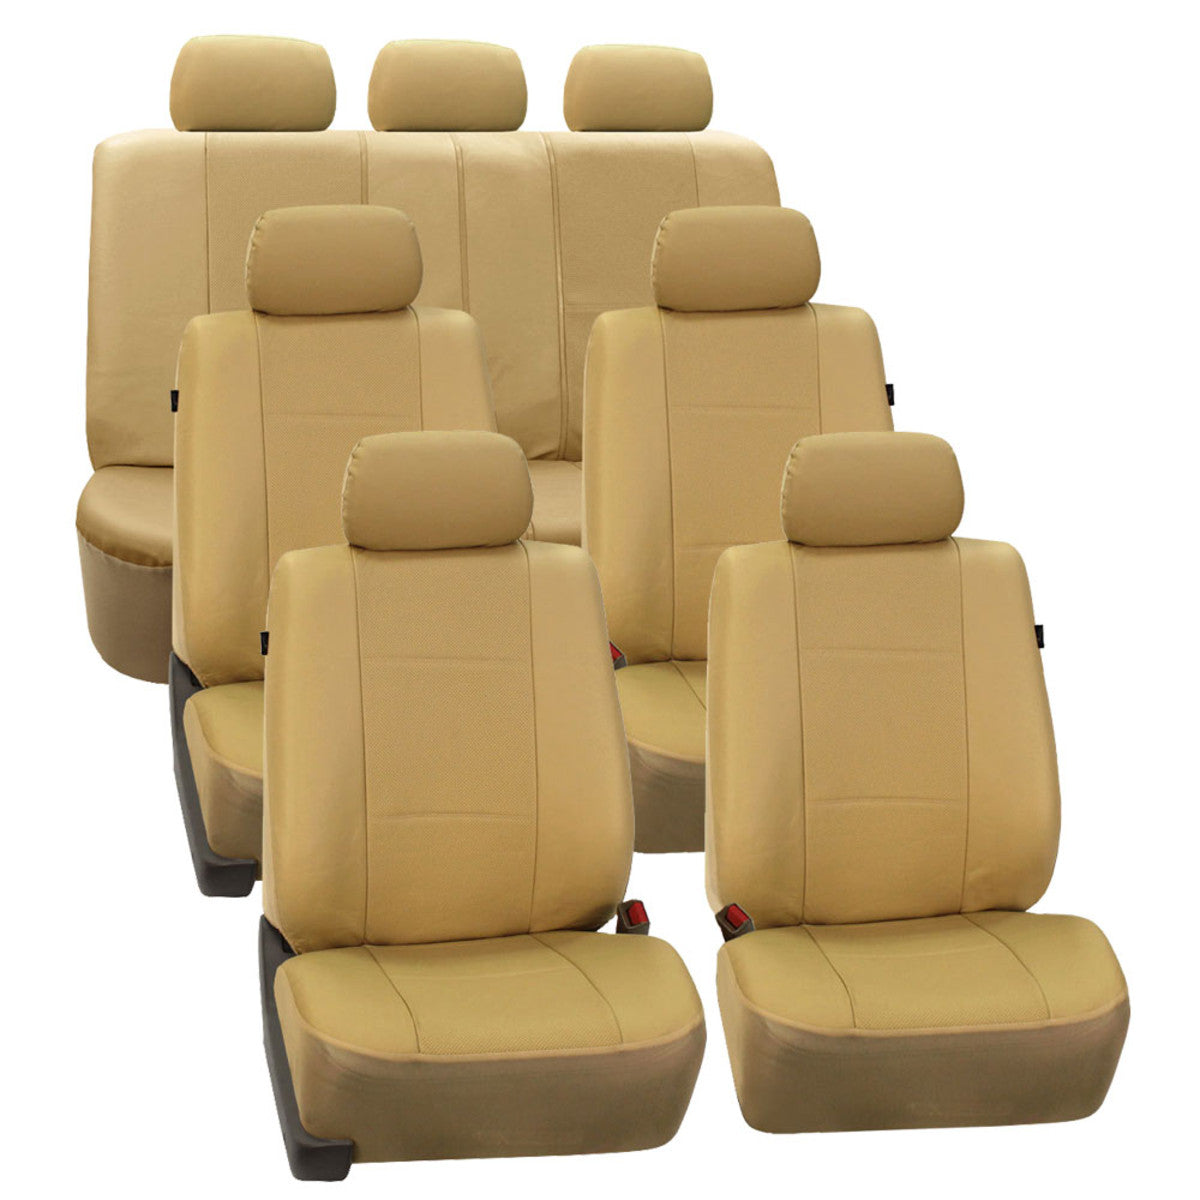 Deluxe Leatherette 3 Row Seat Covers Tan